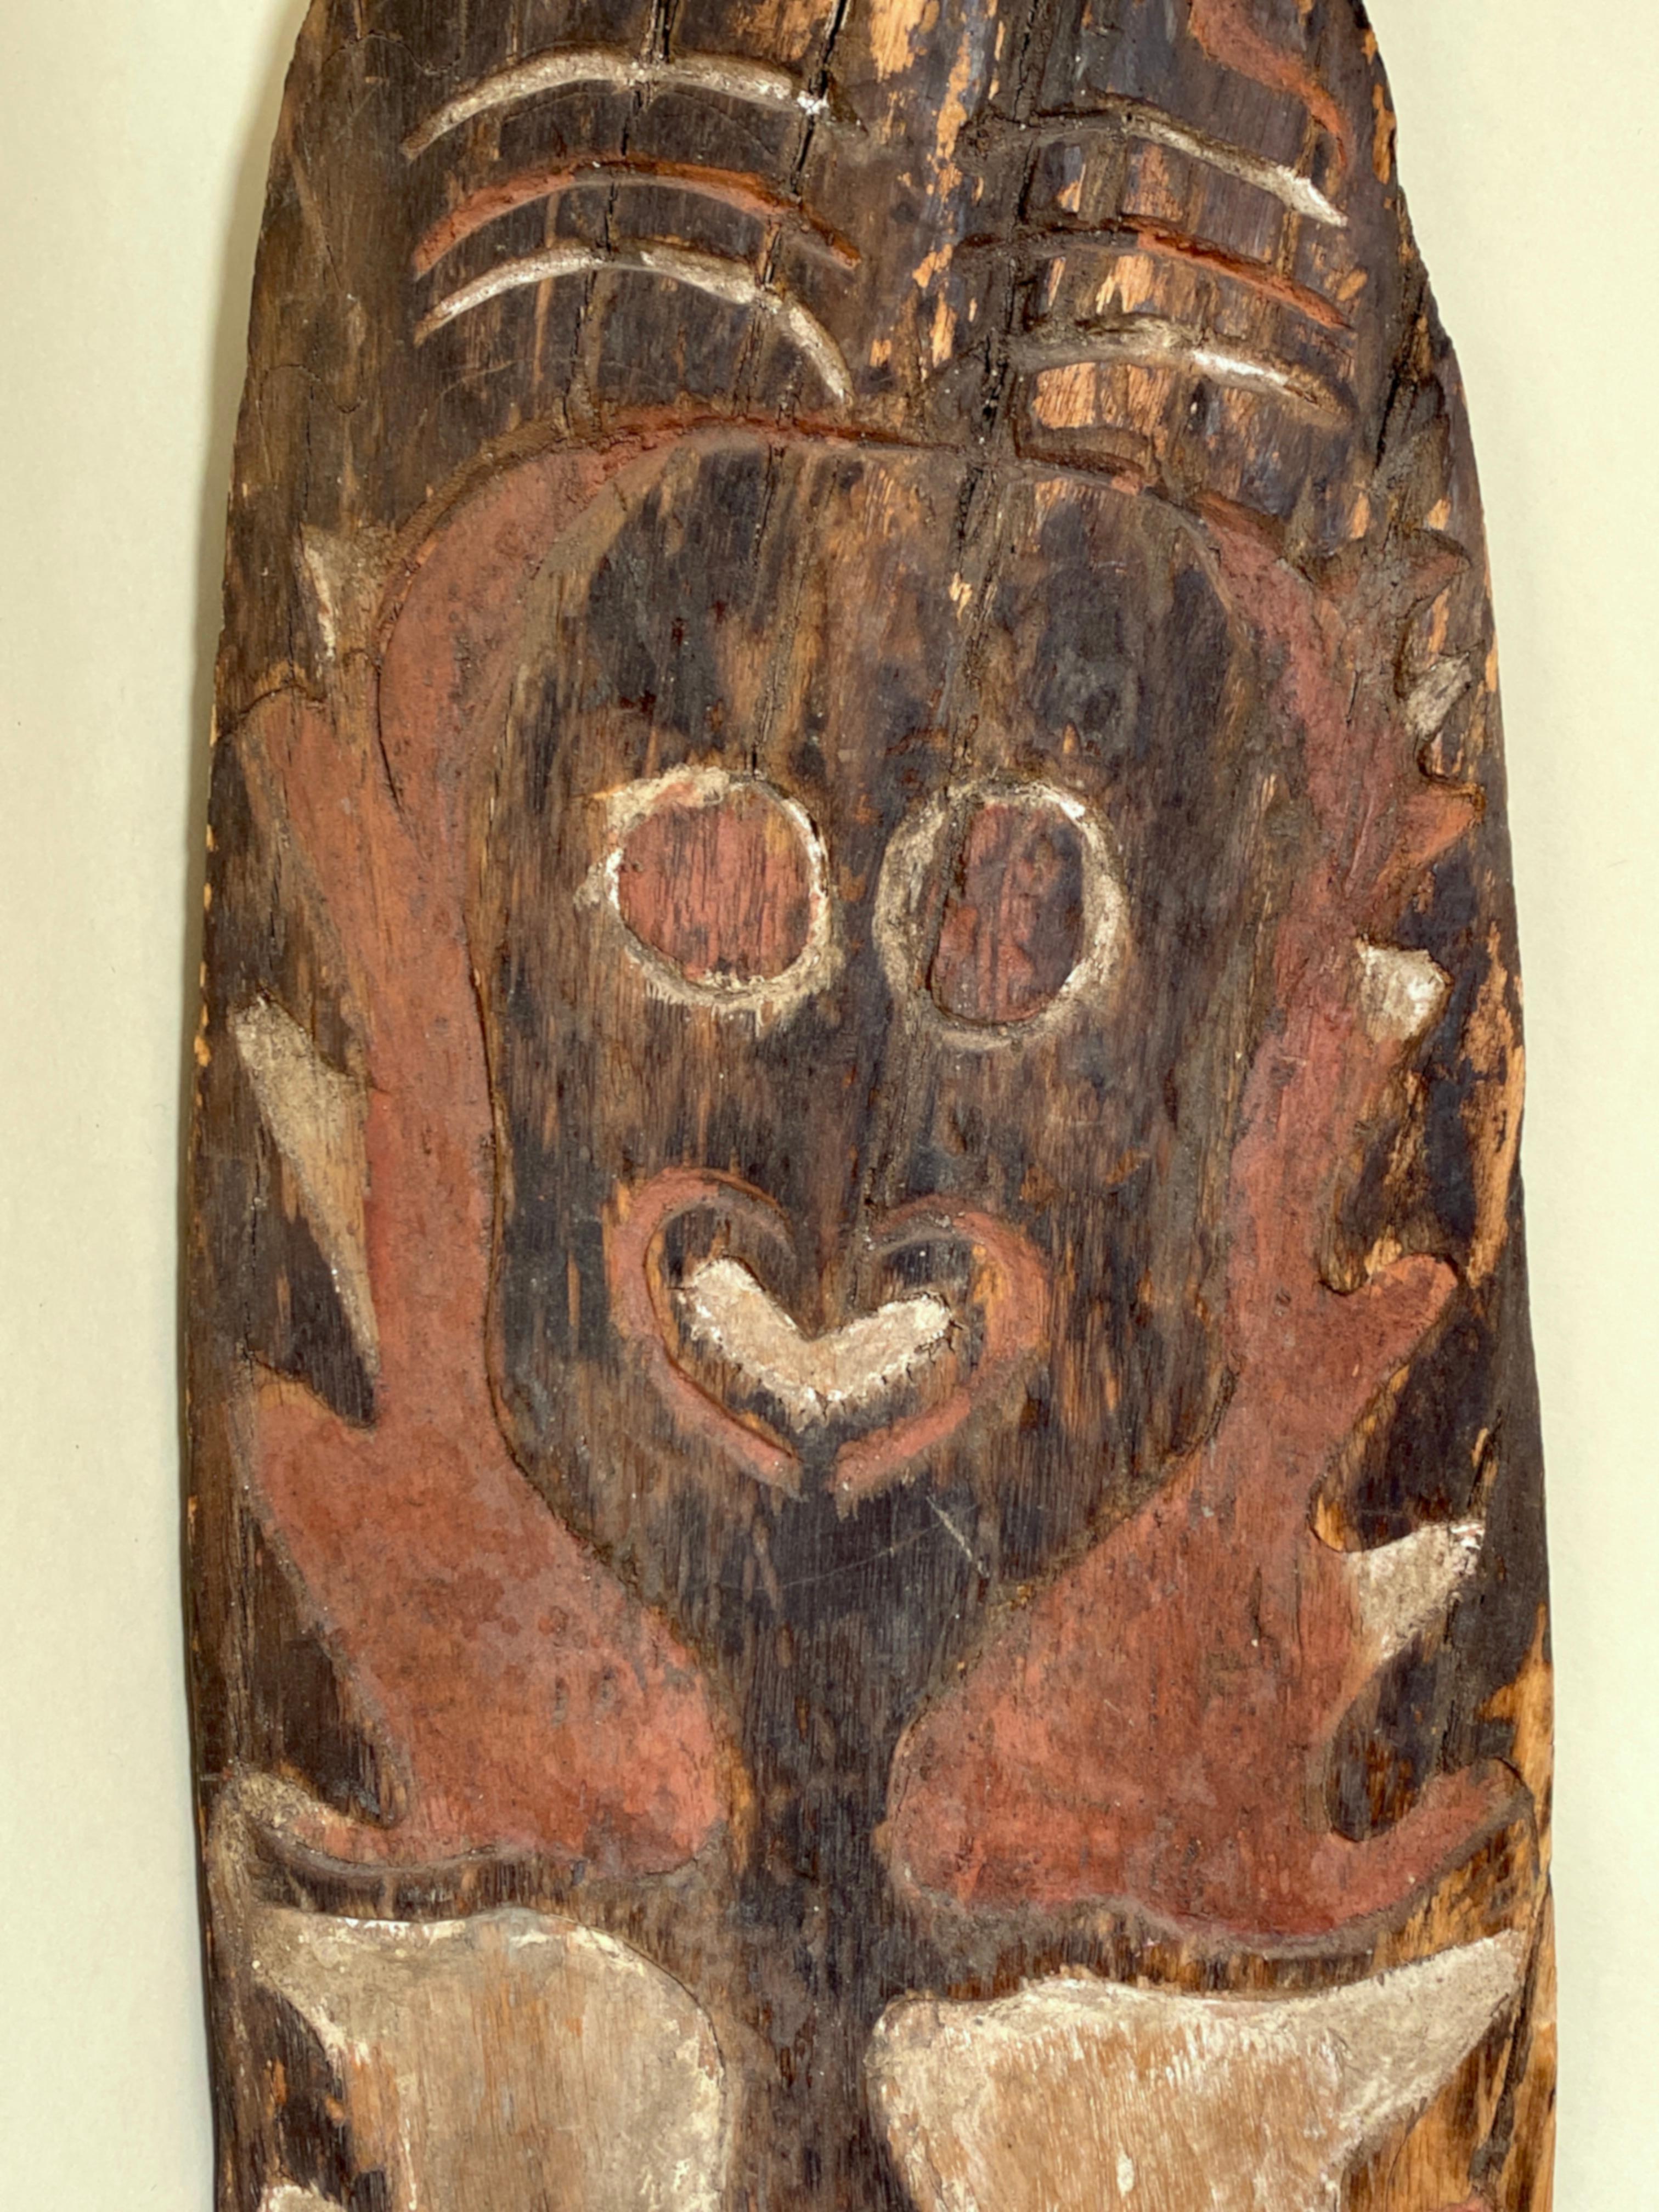 Papuan Gulf ancestor spirit board, called Gope, early 20th century. Wood with natural pigments and charcoal. An intriguing spirit carving, with good provenance. 1963 is a relatively early date for Papuan art to enter an American